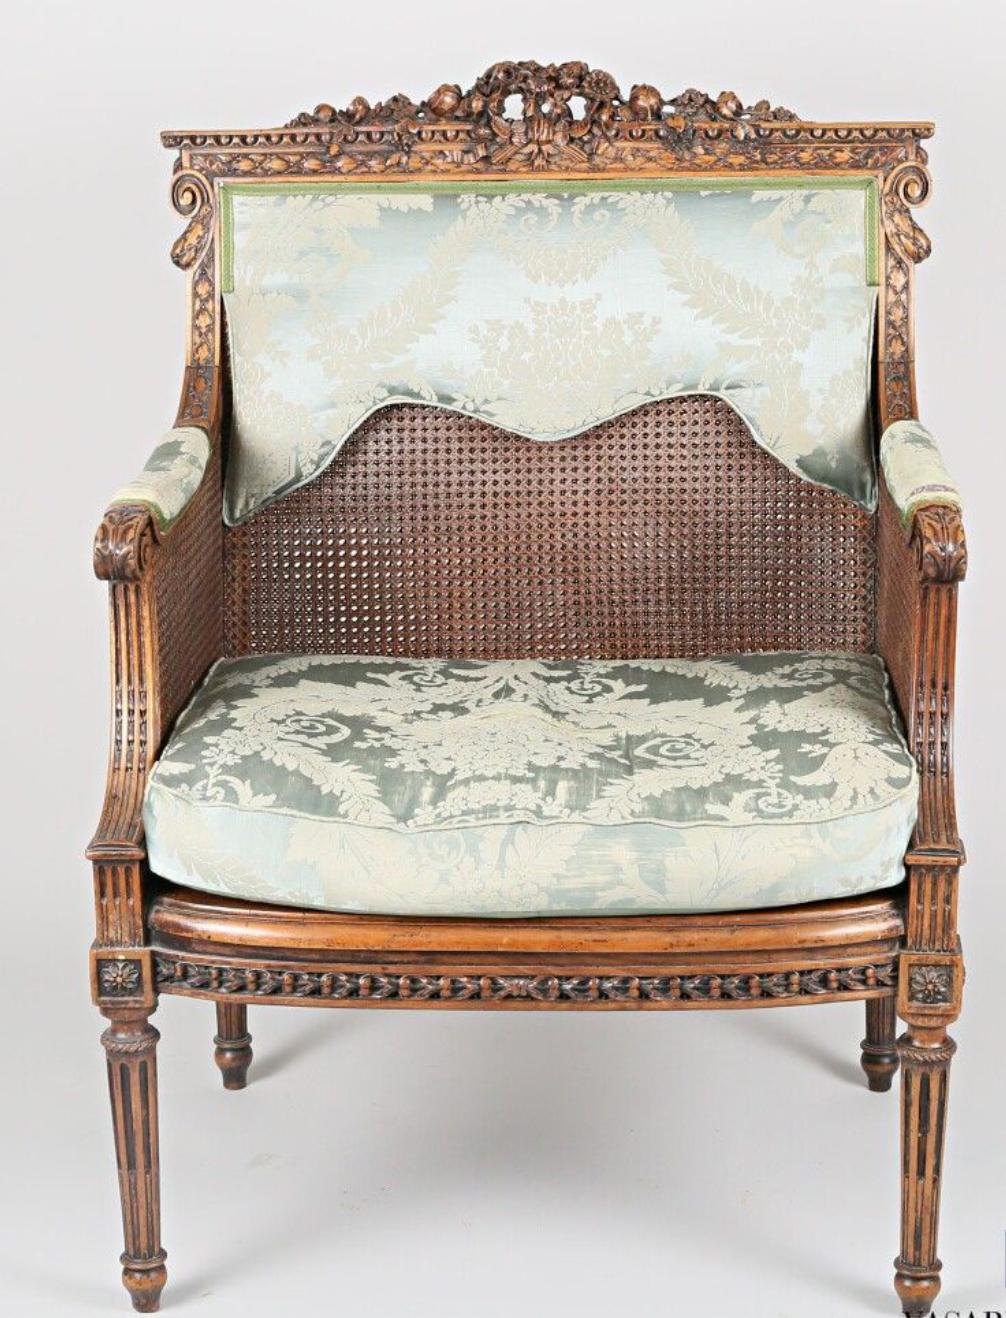 Louis XVI 19th Century French Hand-Carved Walnut Marquise in Louise XVI Style